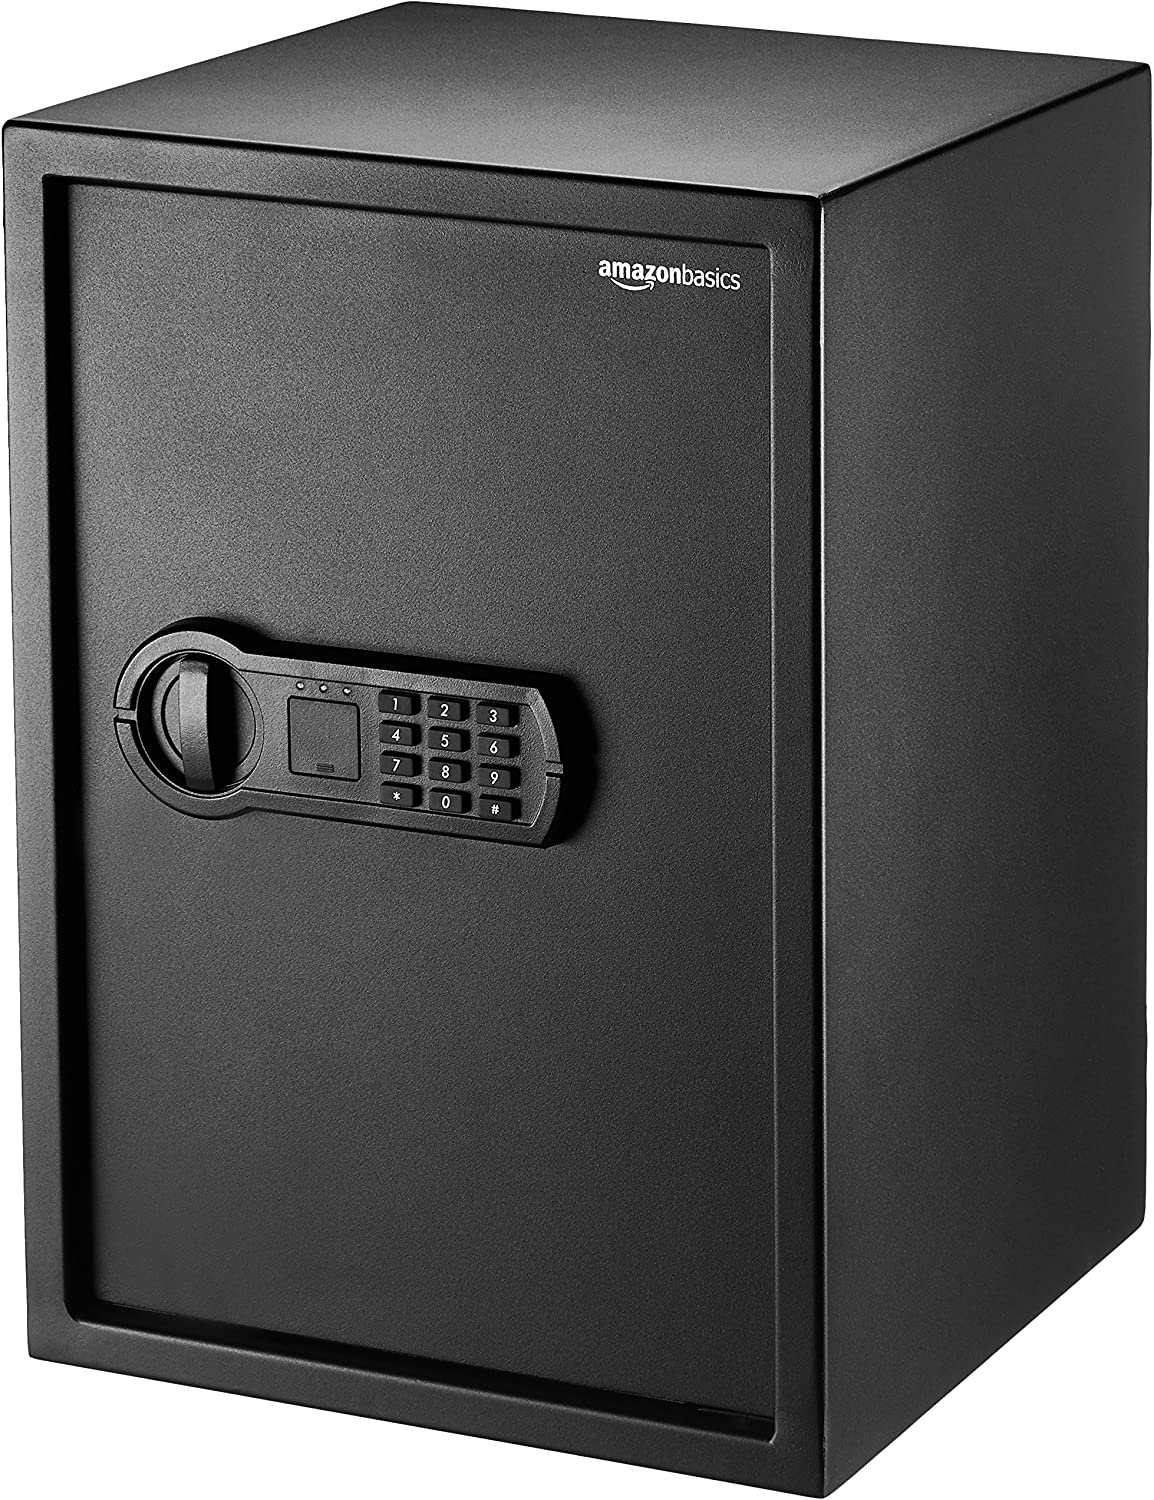 The Best Small Home Safes For 2021 | HomeIdeas